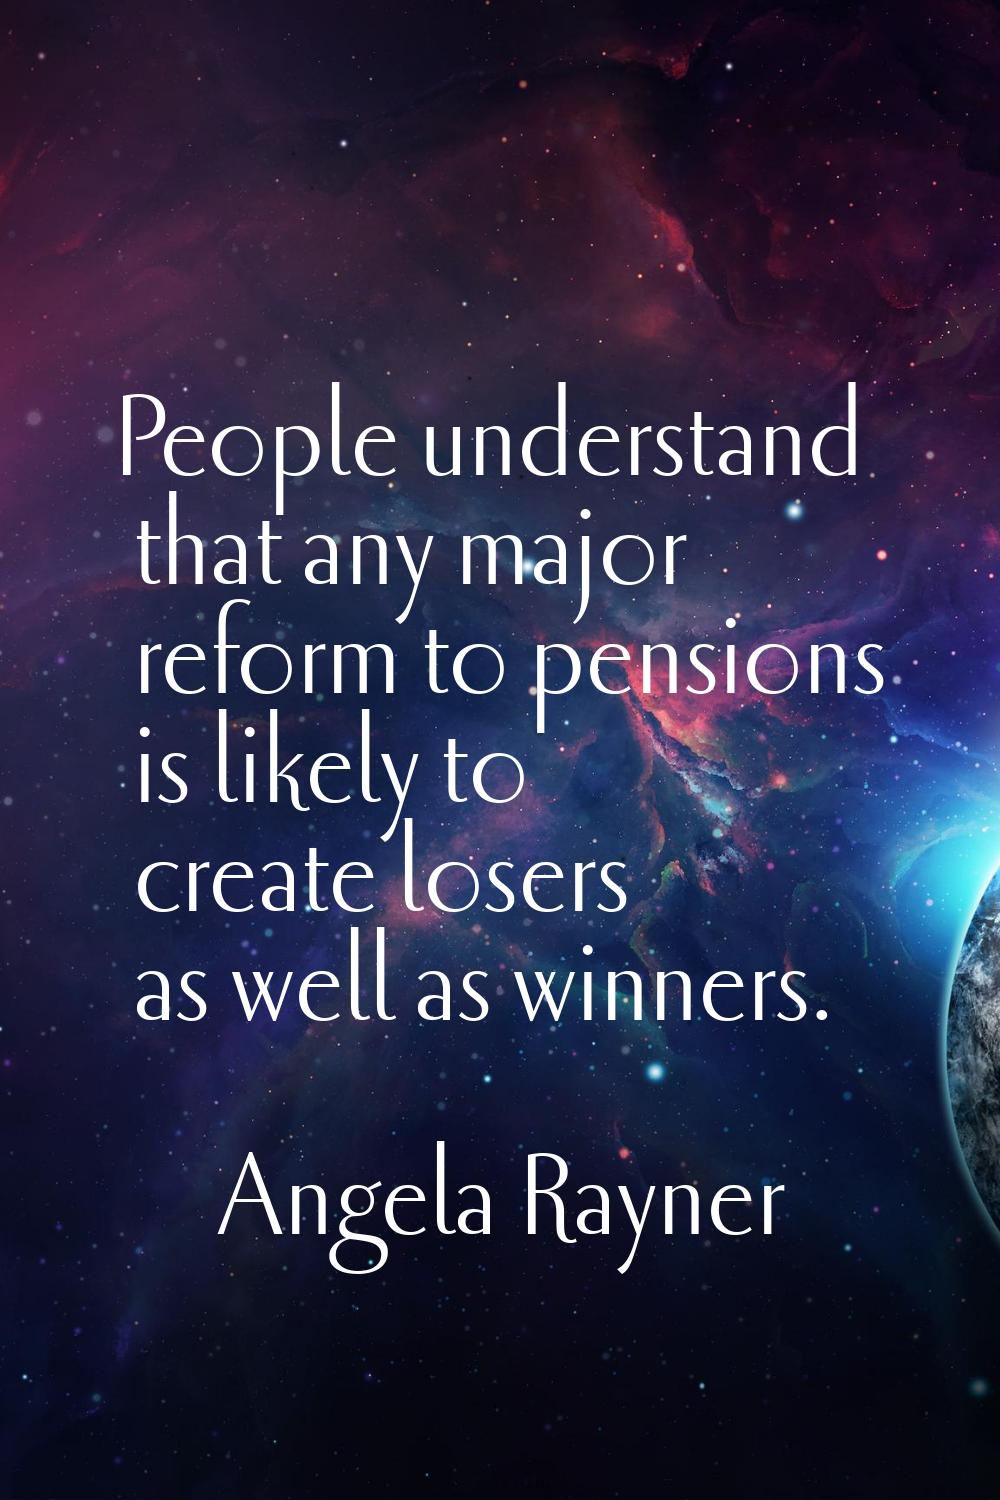 People understand that any major reform to pensions is likely to create losers as well as winners.